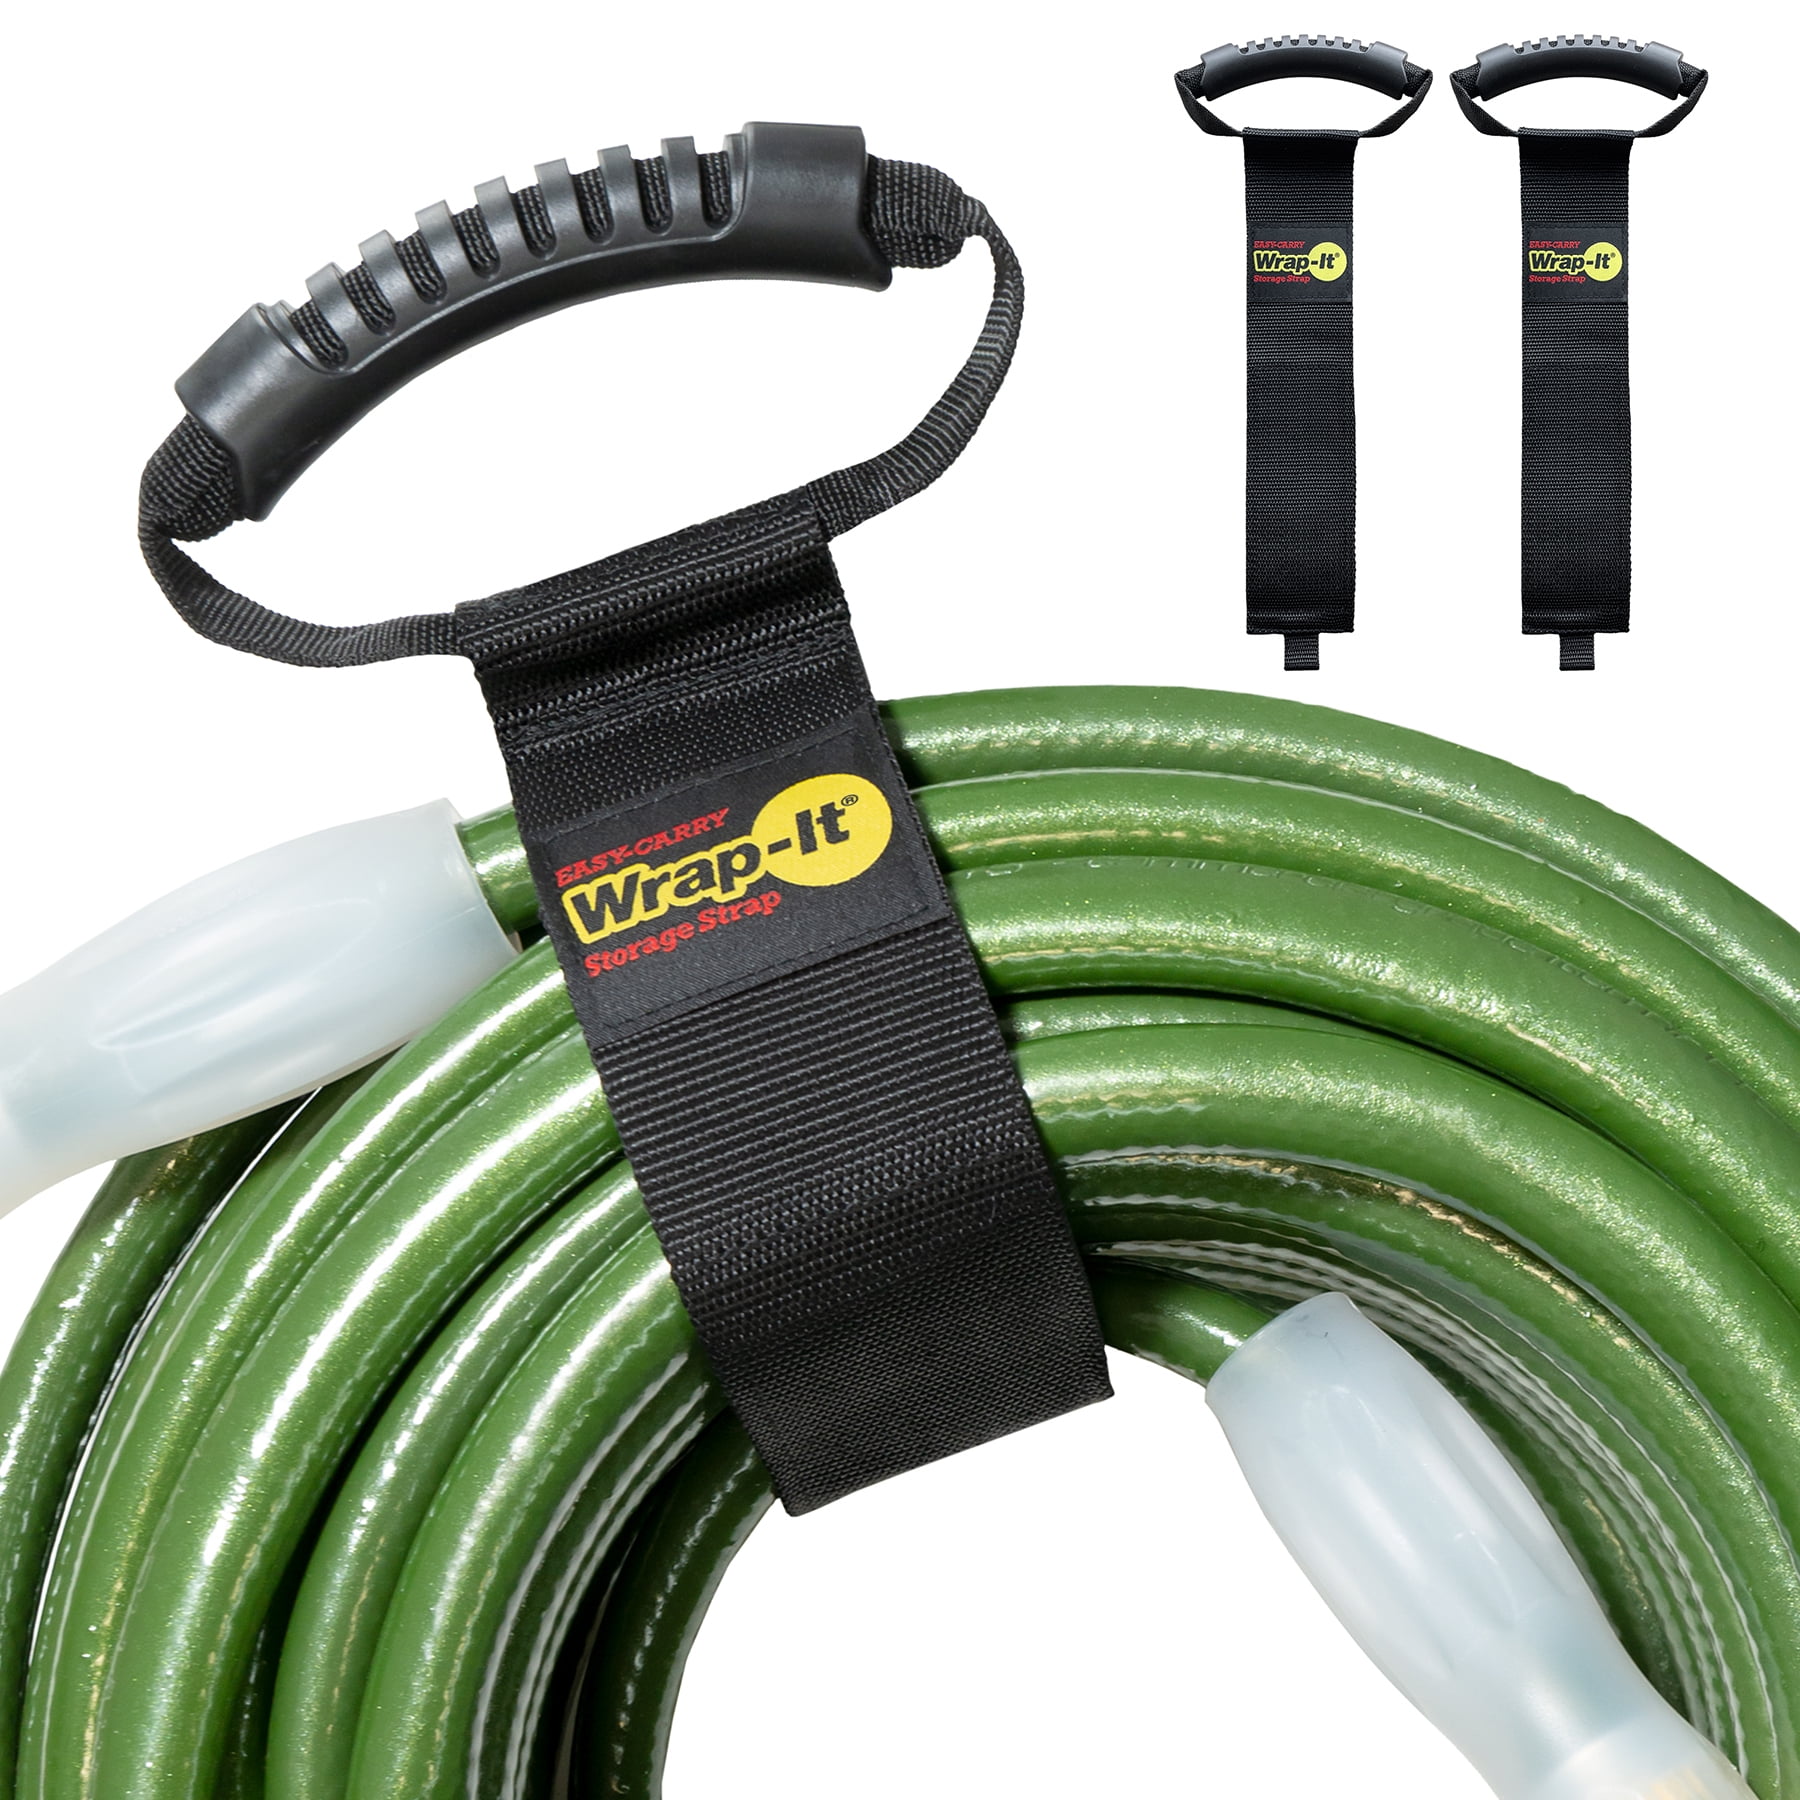 VELCRO Brand Easy Hang Strap, Heavy Duty Outdoor Storage Extension Cords,  Cables, Tools, Bikes Organization for Garden, Shed, RV, Large - up to 300  lbs, Black 